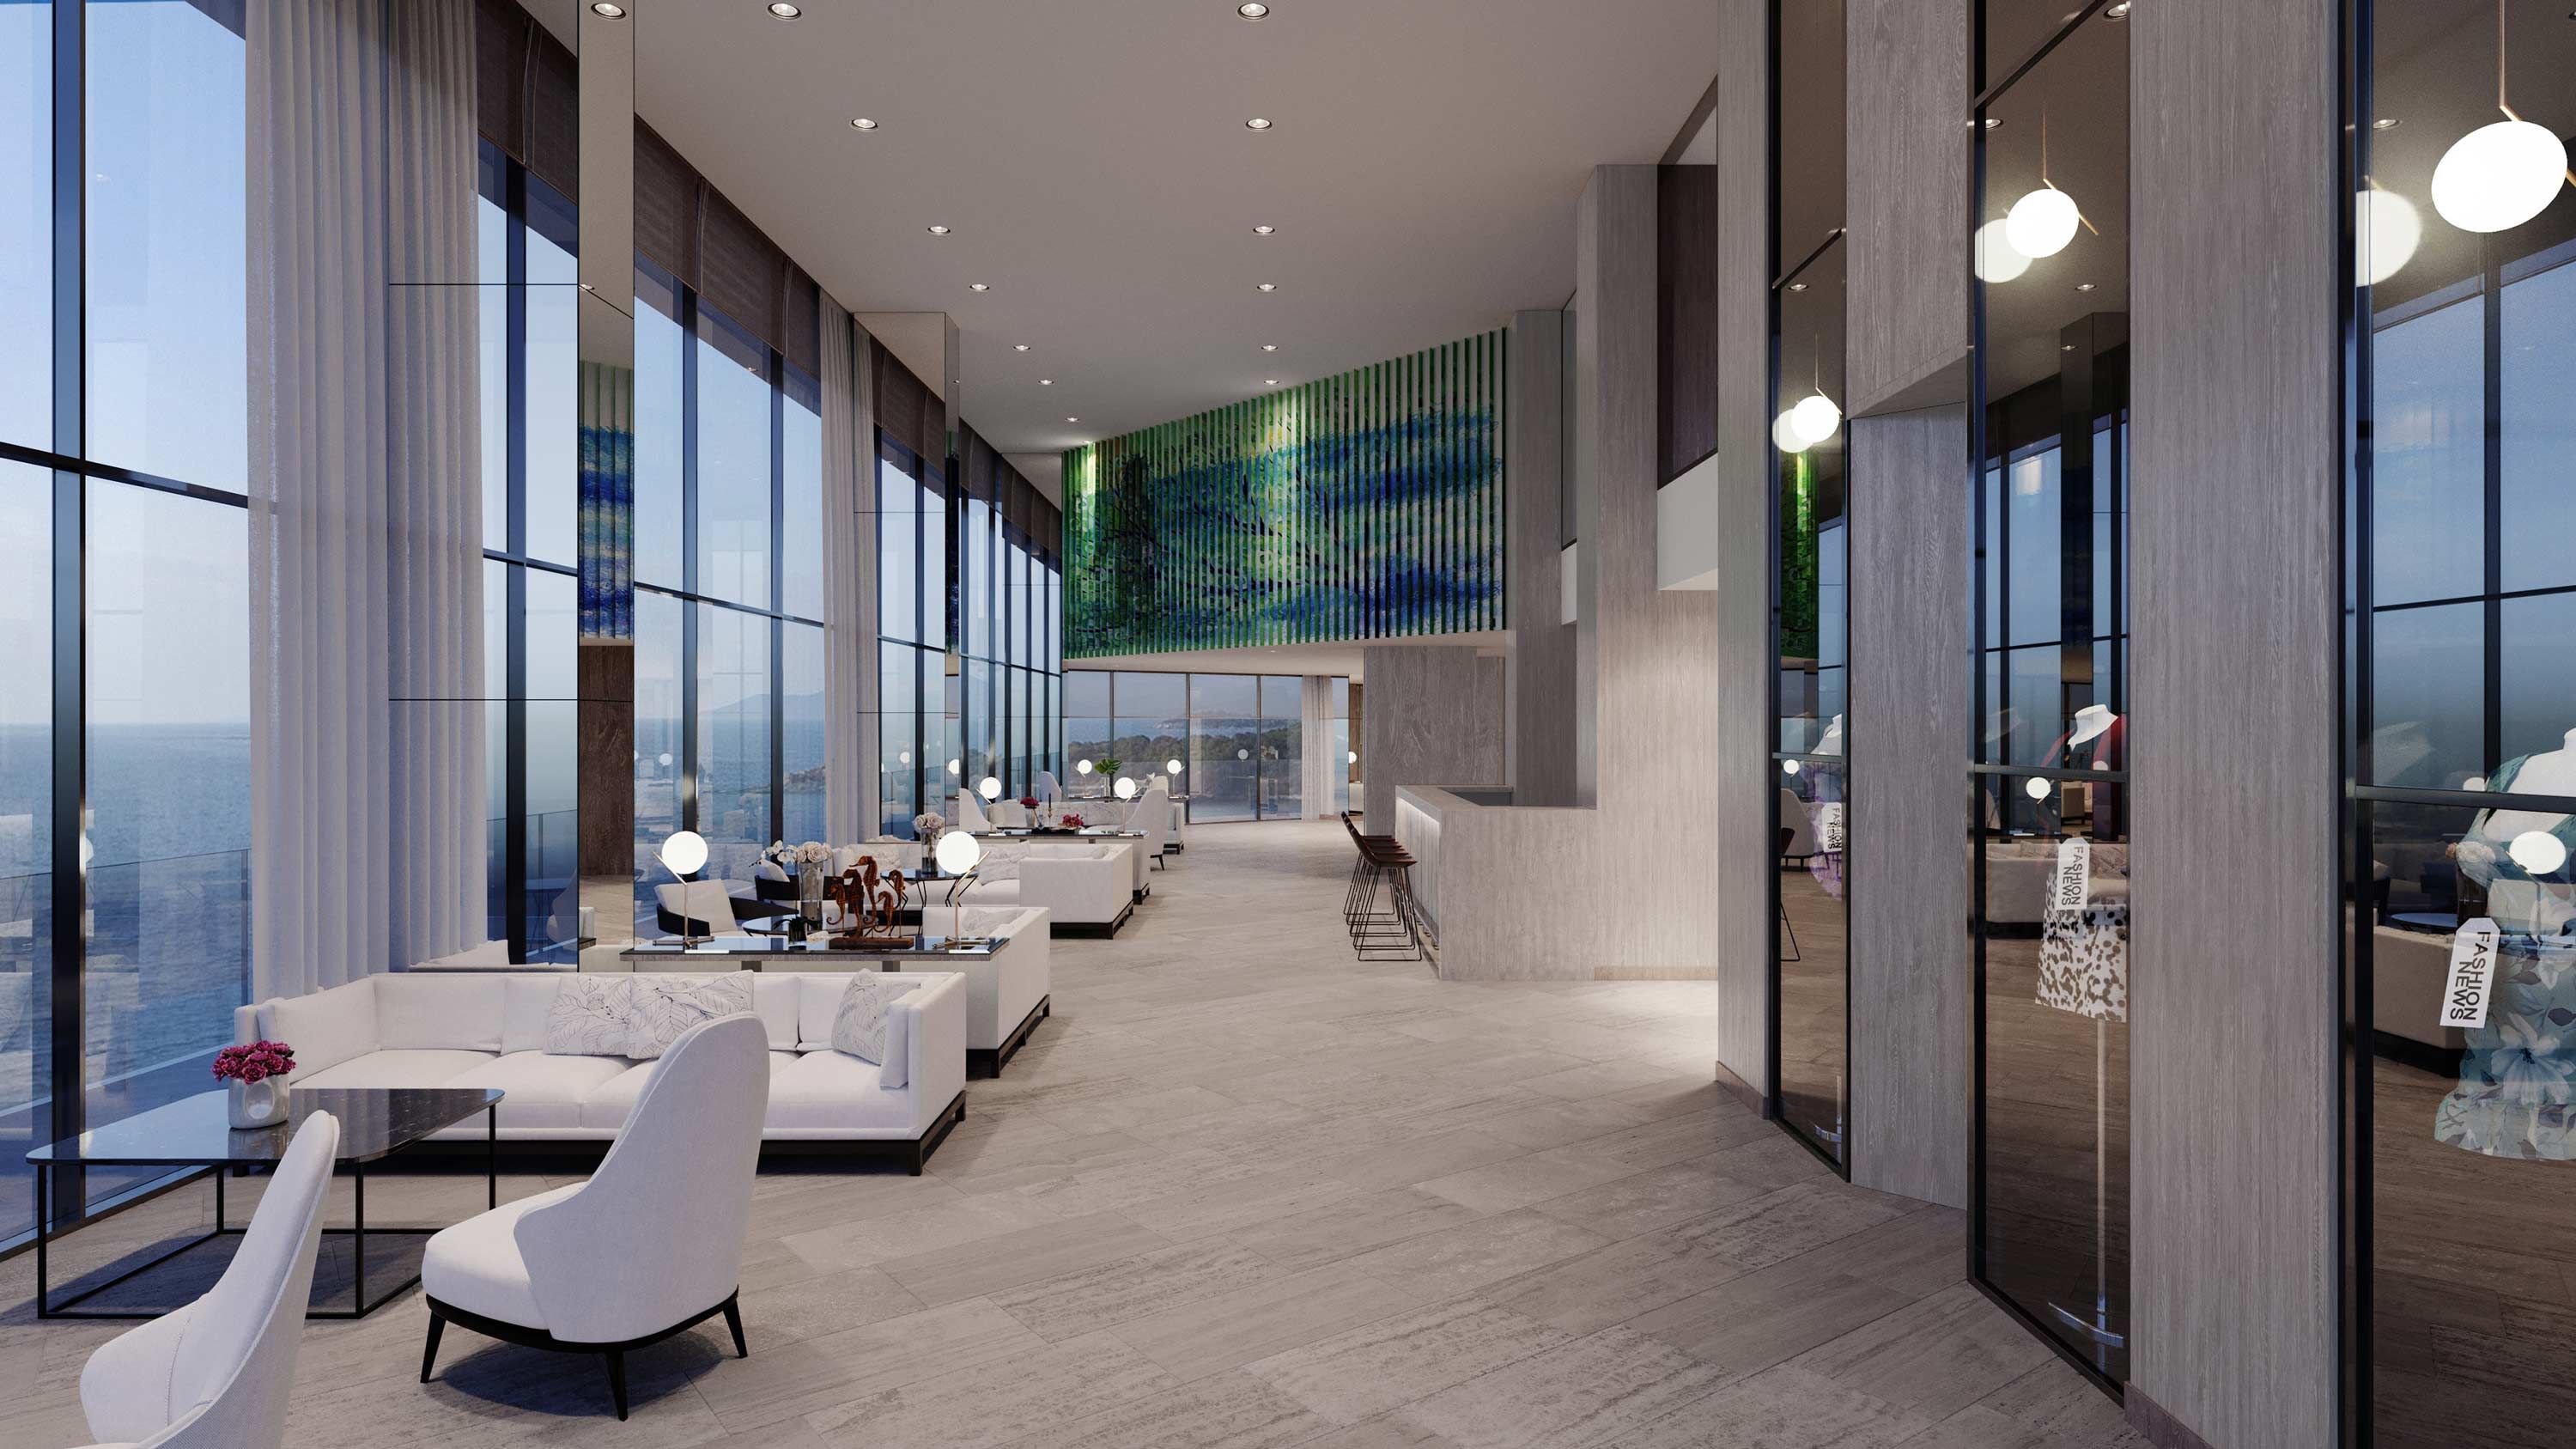 large floor to ceiling windows with window treatments and hotel lobby